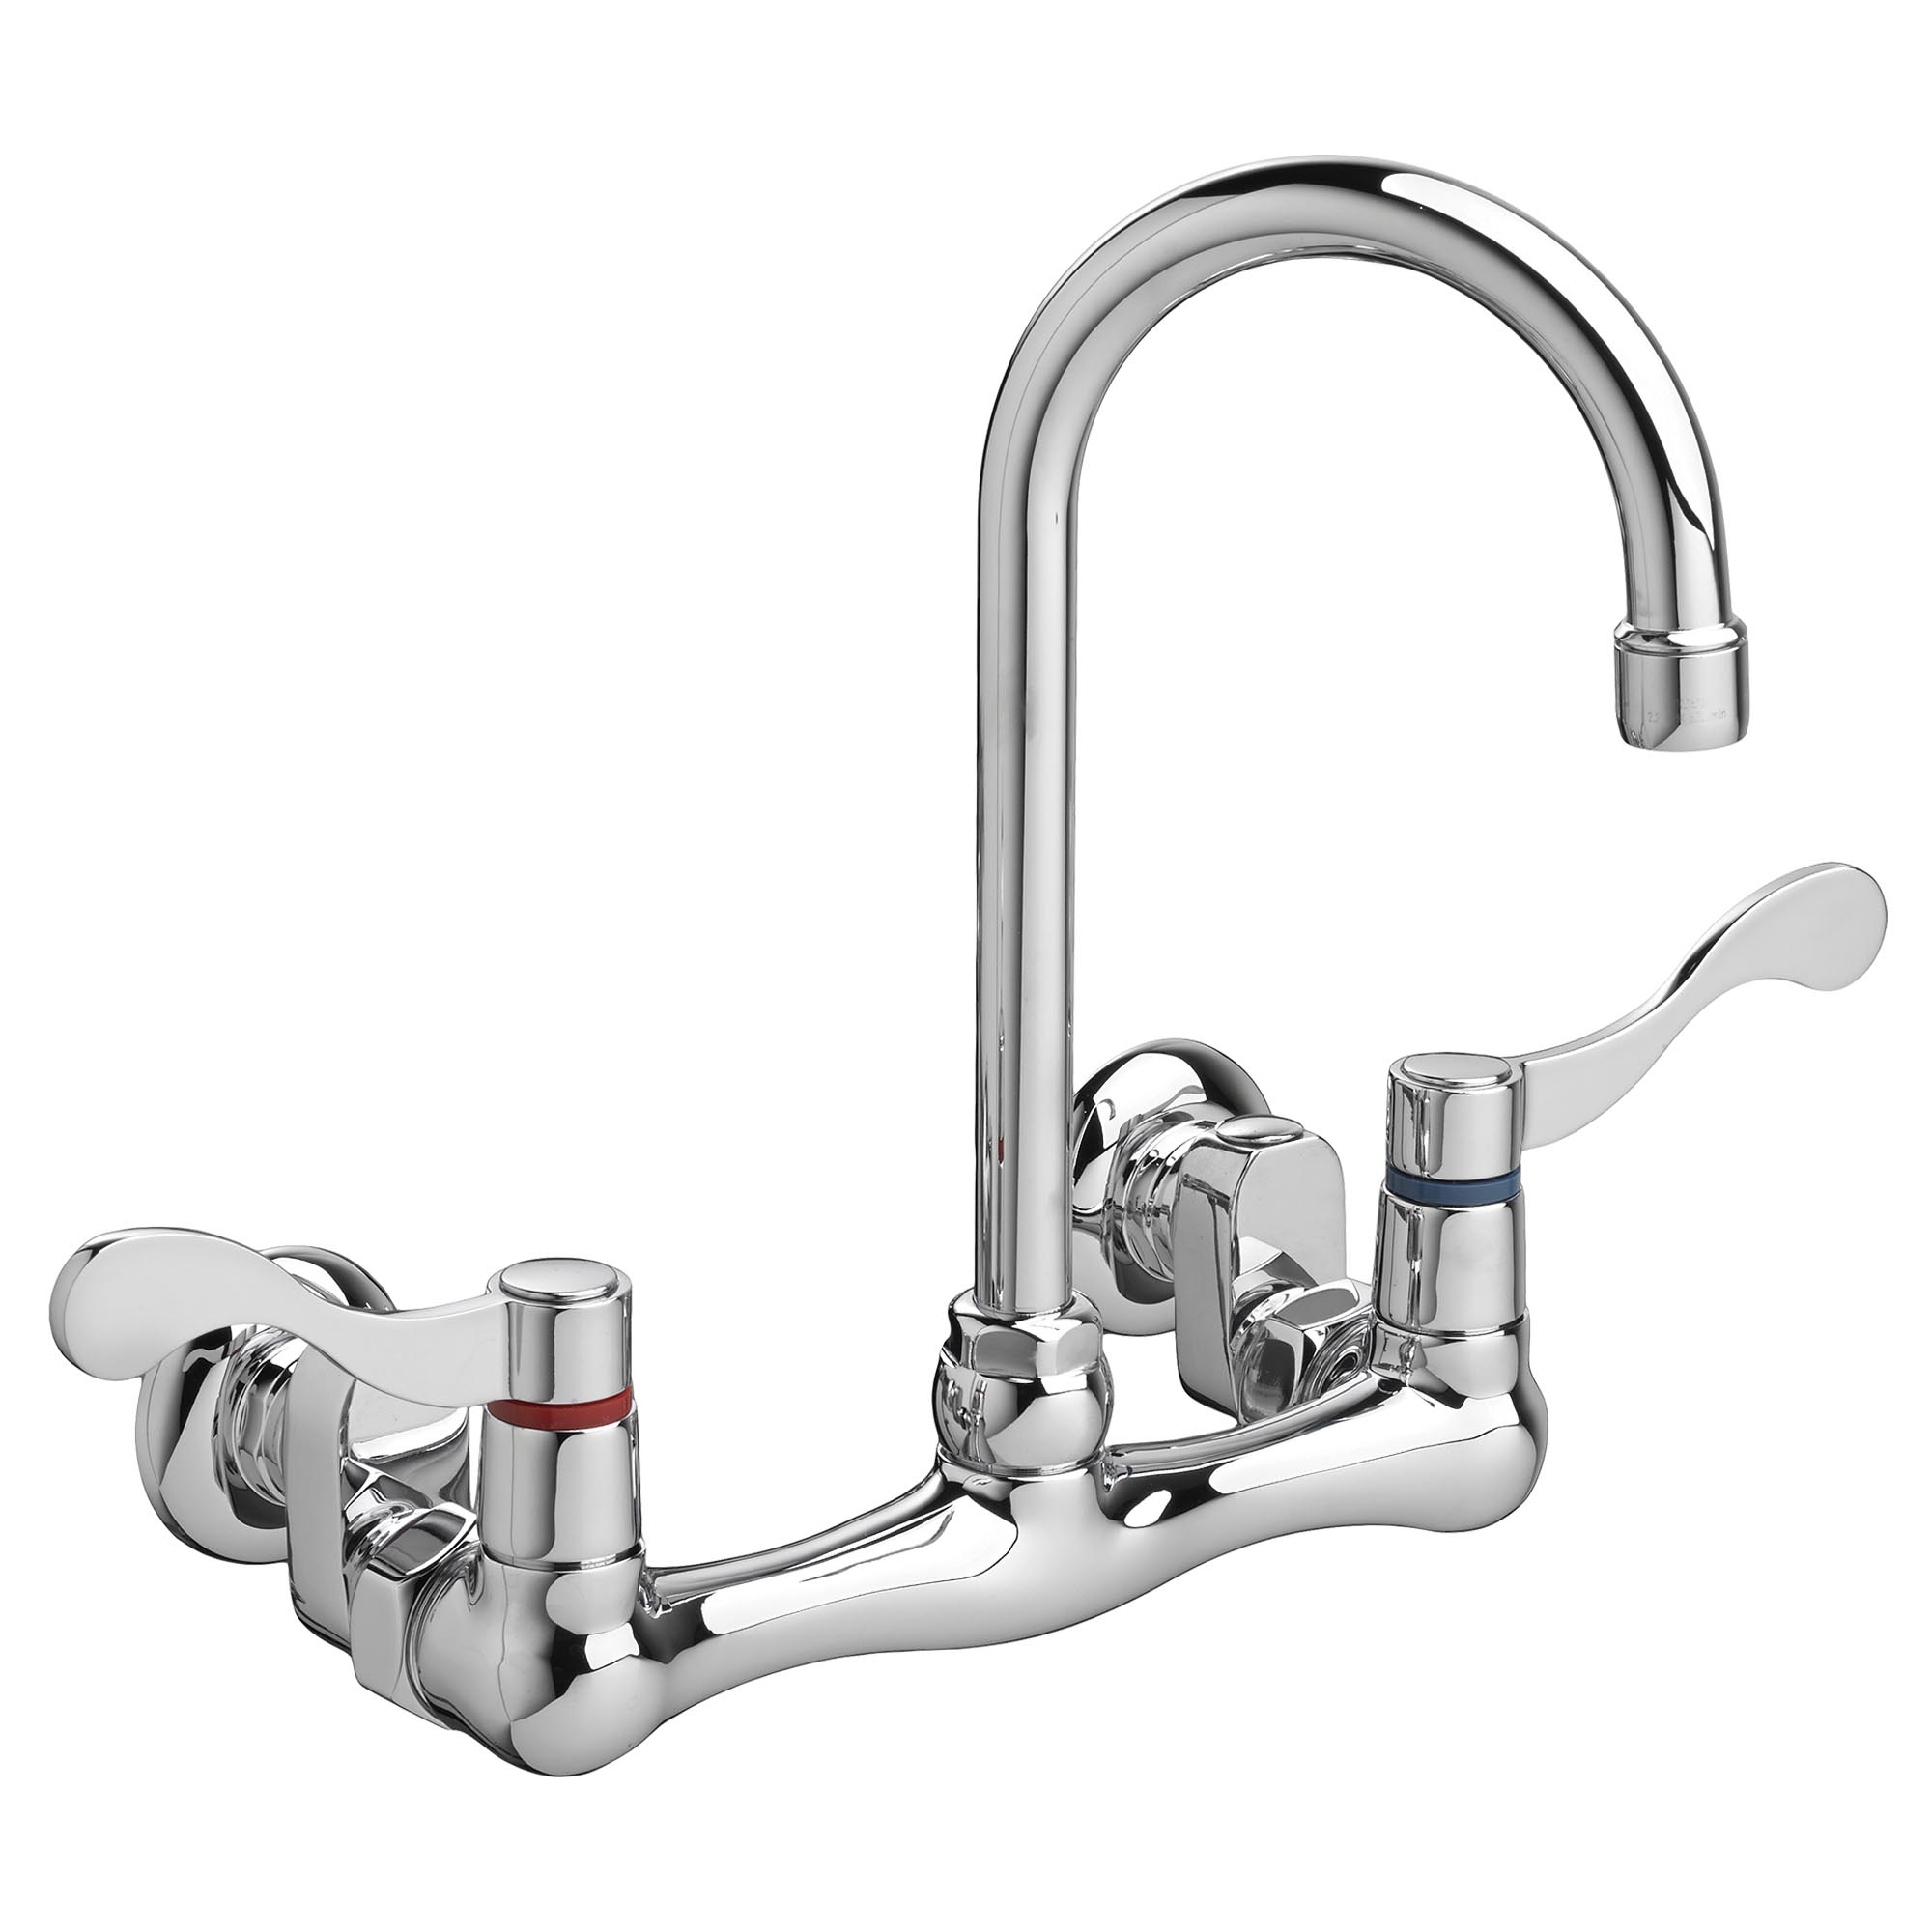 Heritage™ Wall Mount Faucet With Gooseneck Spout, Wrist Blade Handles and Offset Shanks